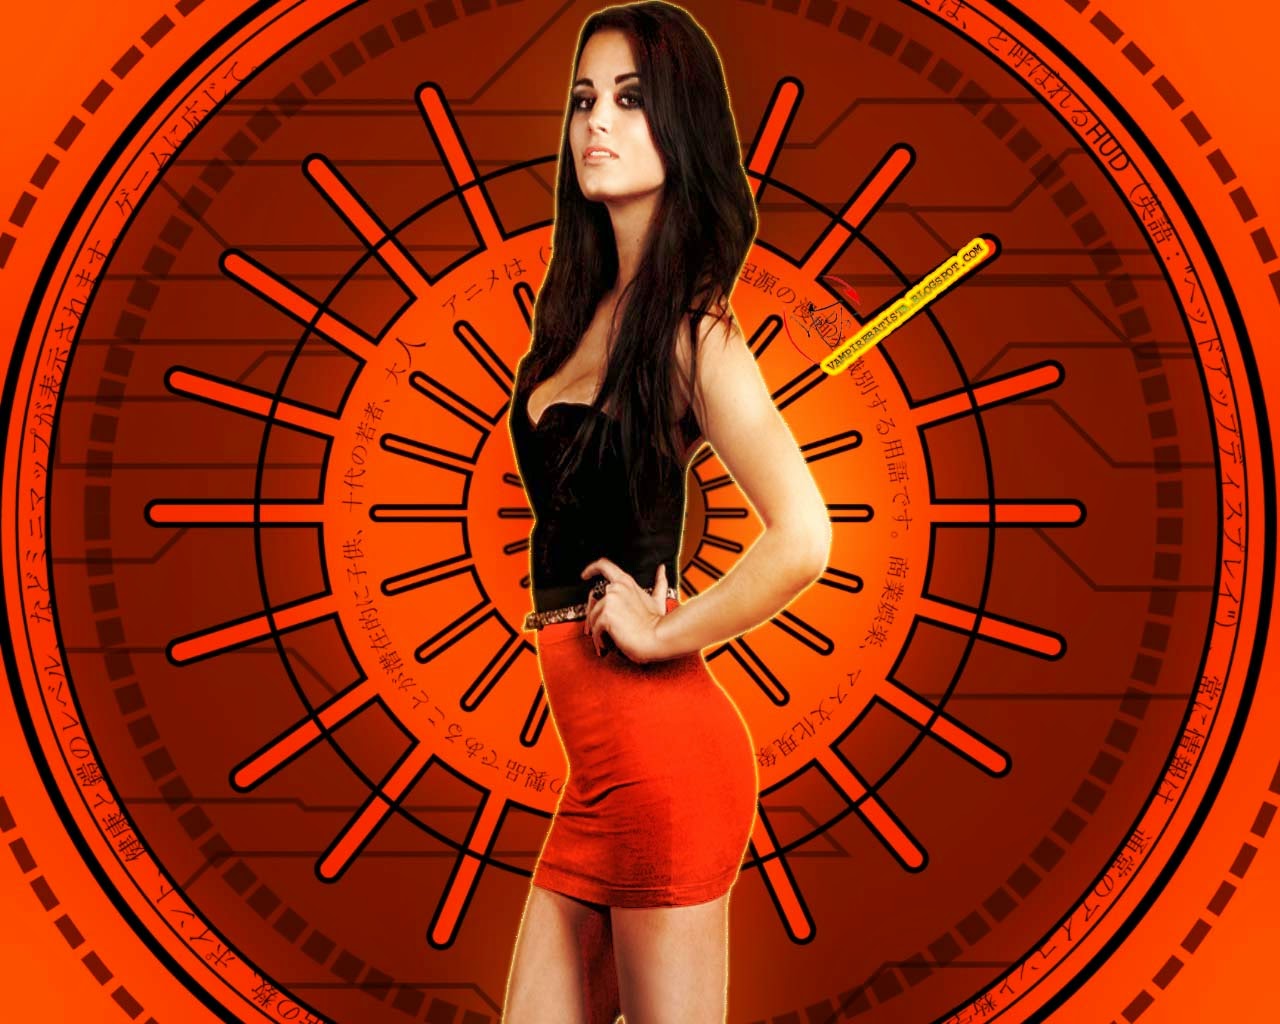 Wwe Nxt Anti Diva Paige So Hot Impact Tna Wrestling And Roh